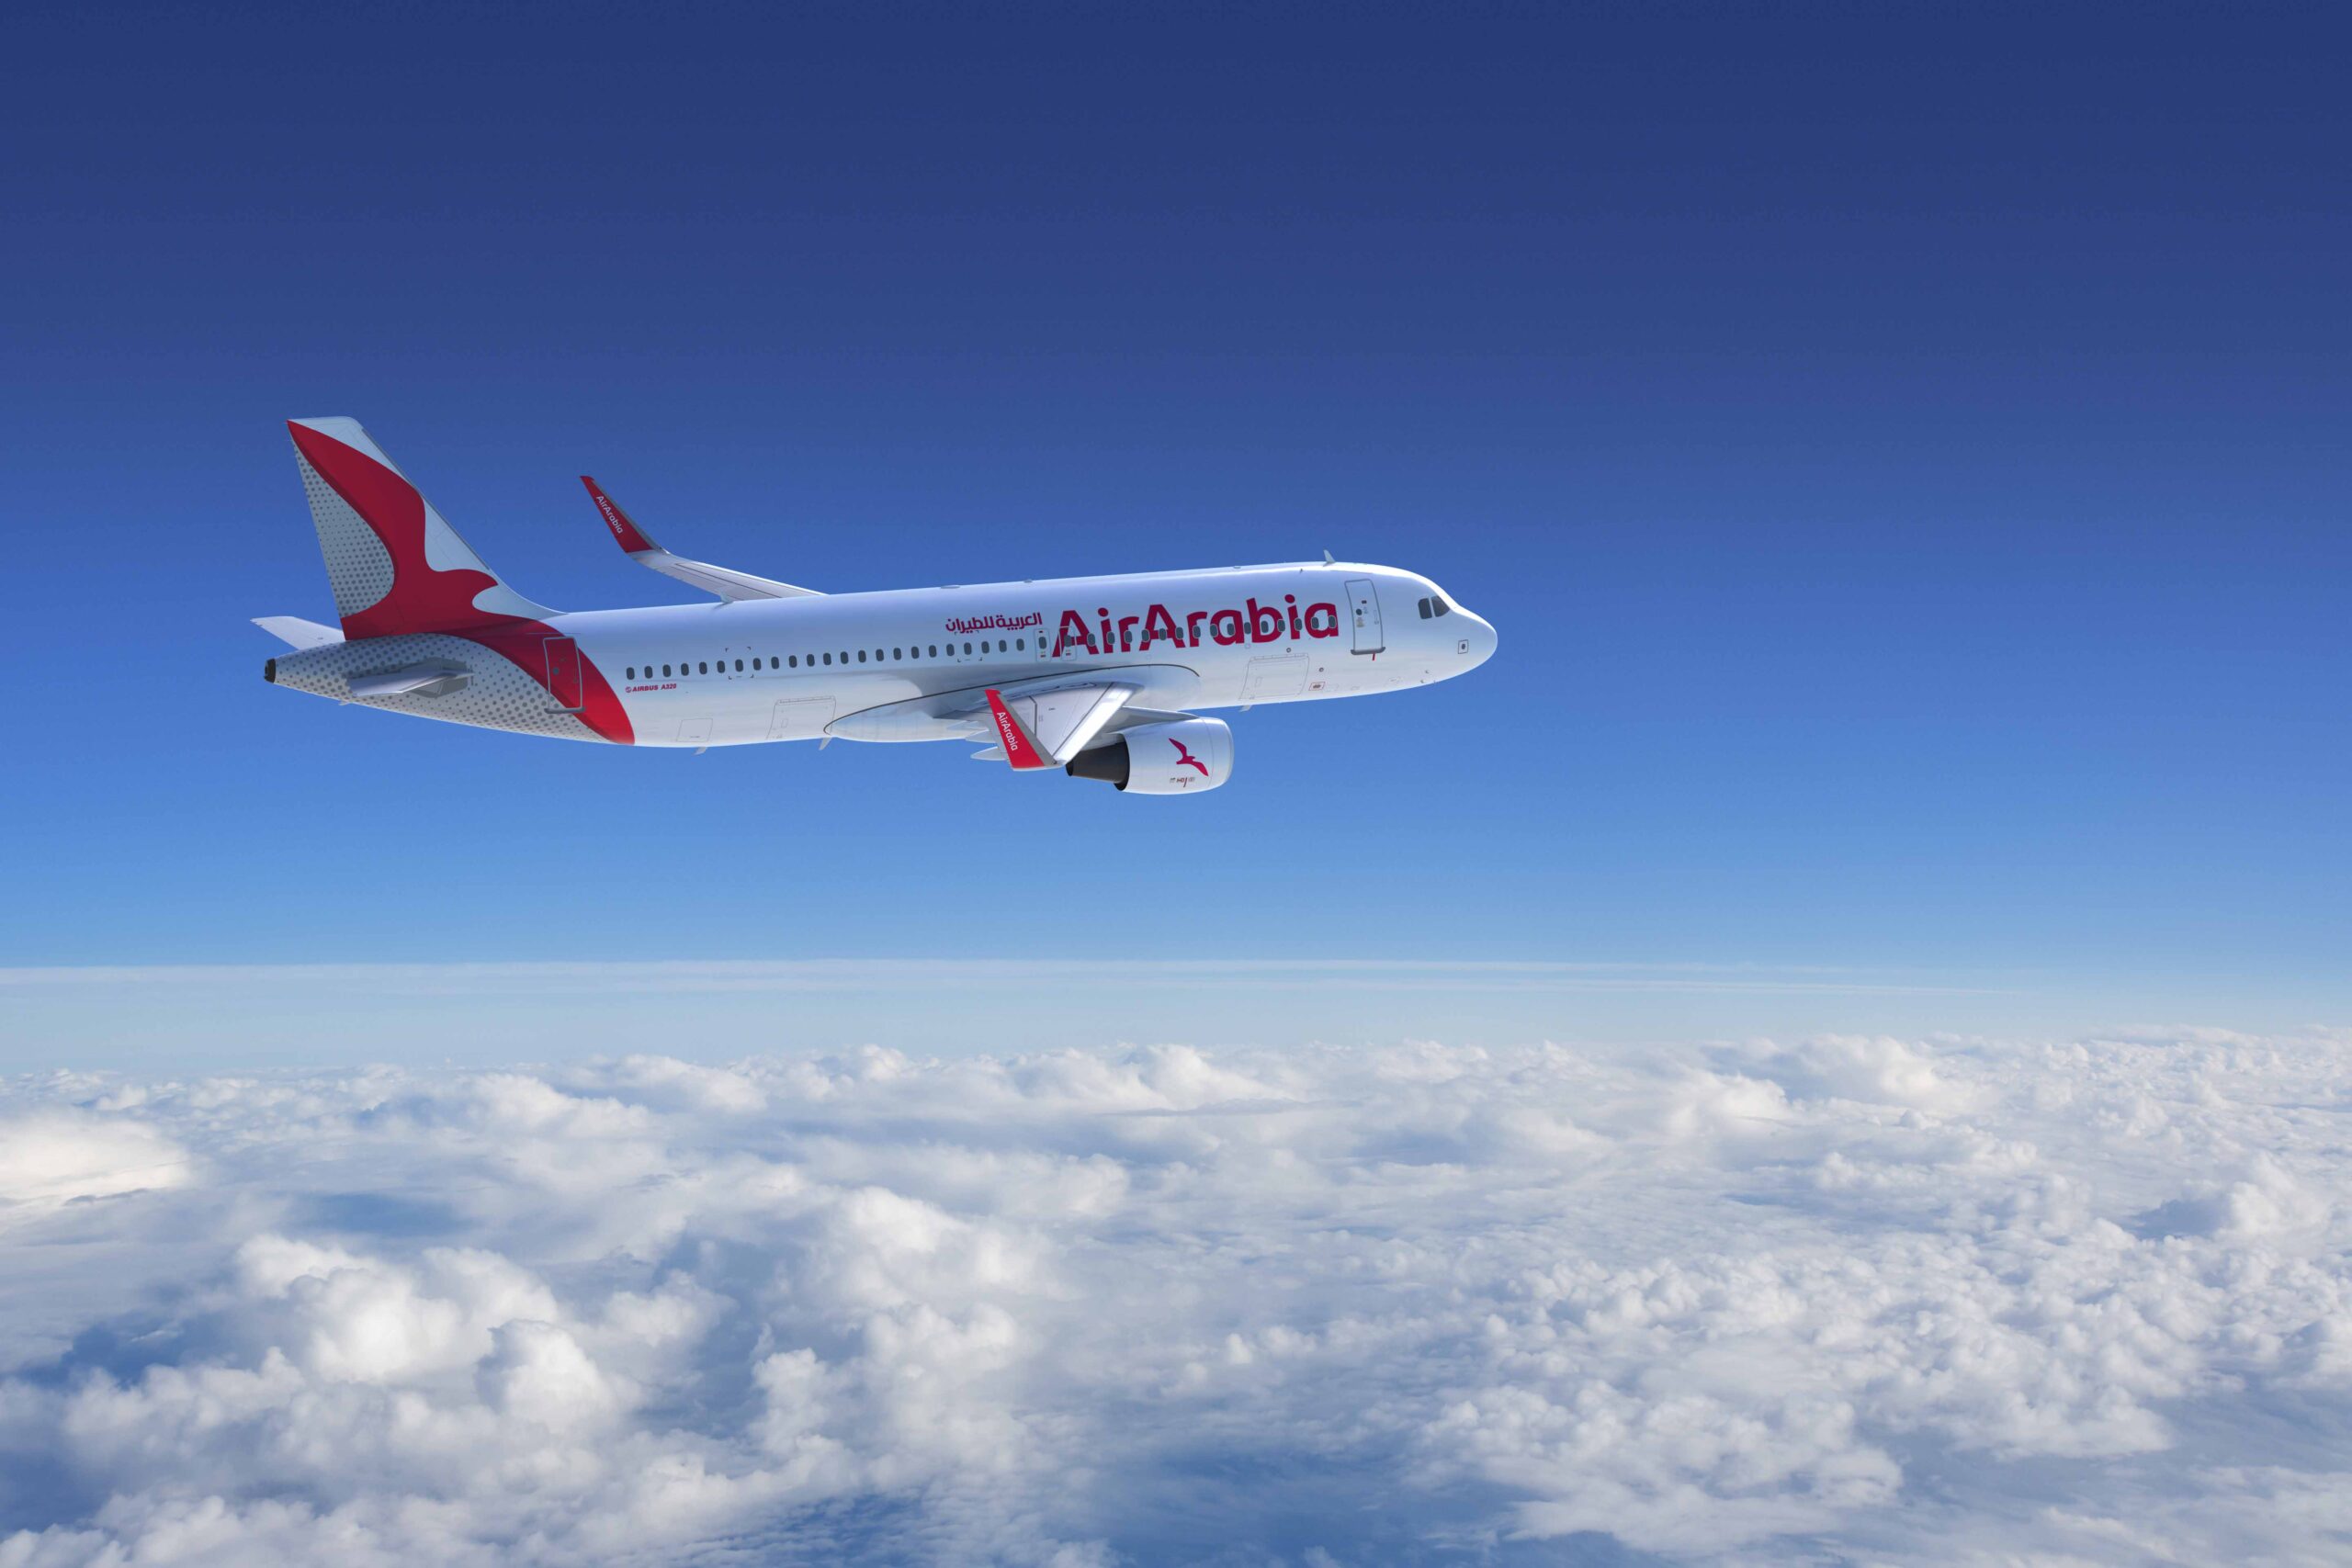 Air Arabia reports record third quarter net profit of AED 416 million, up 99%